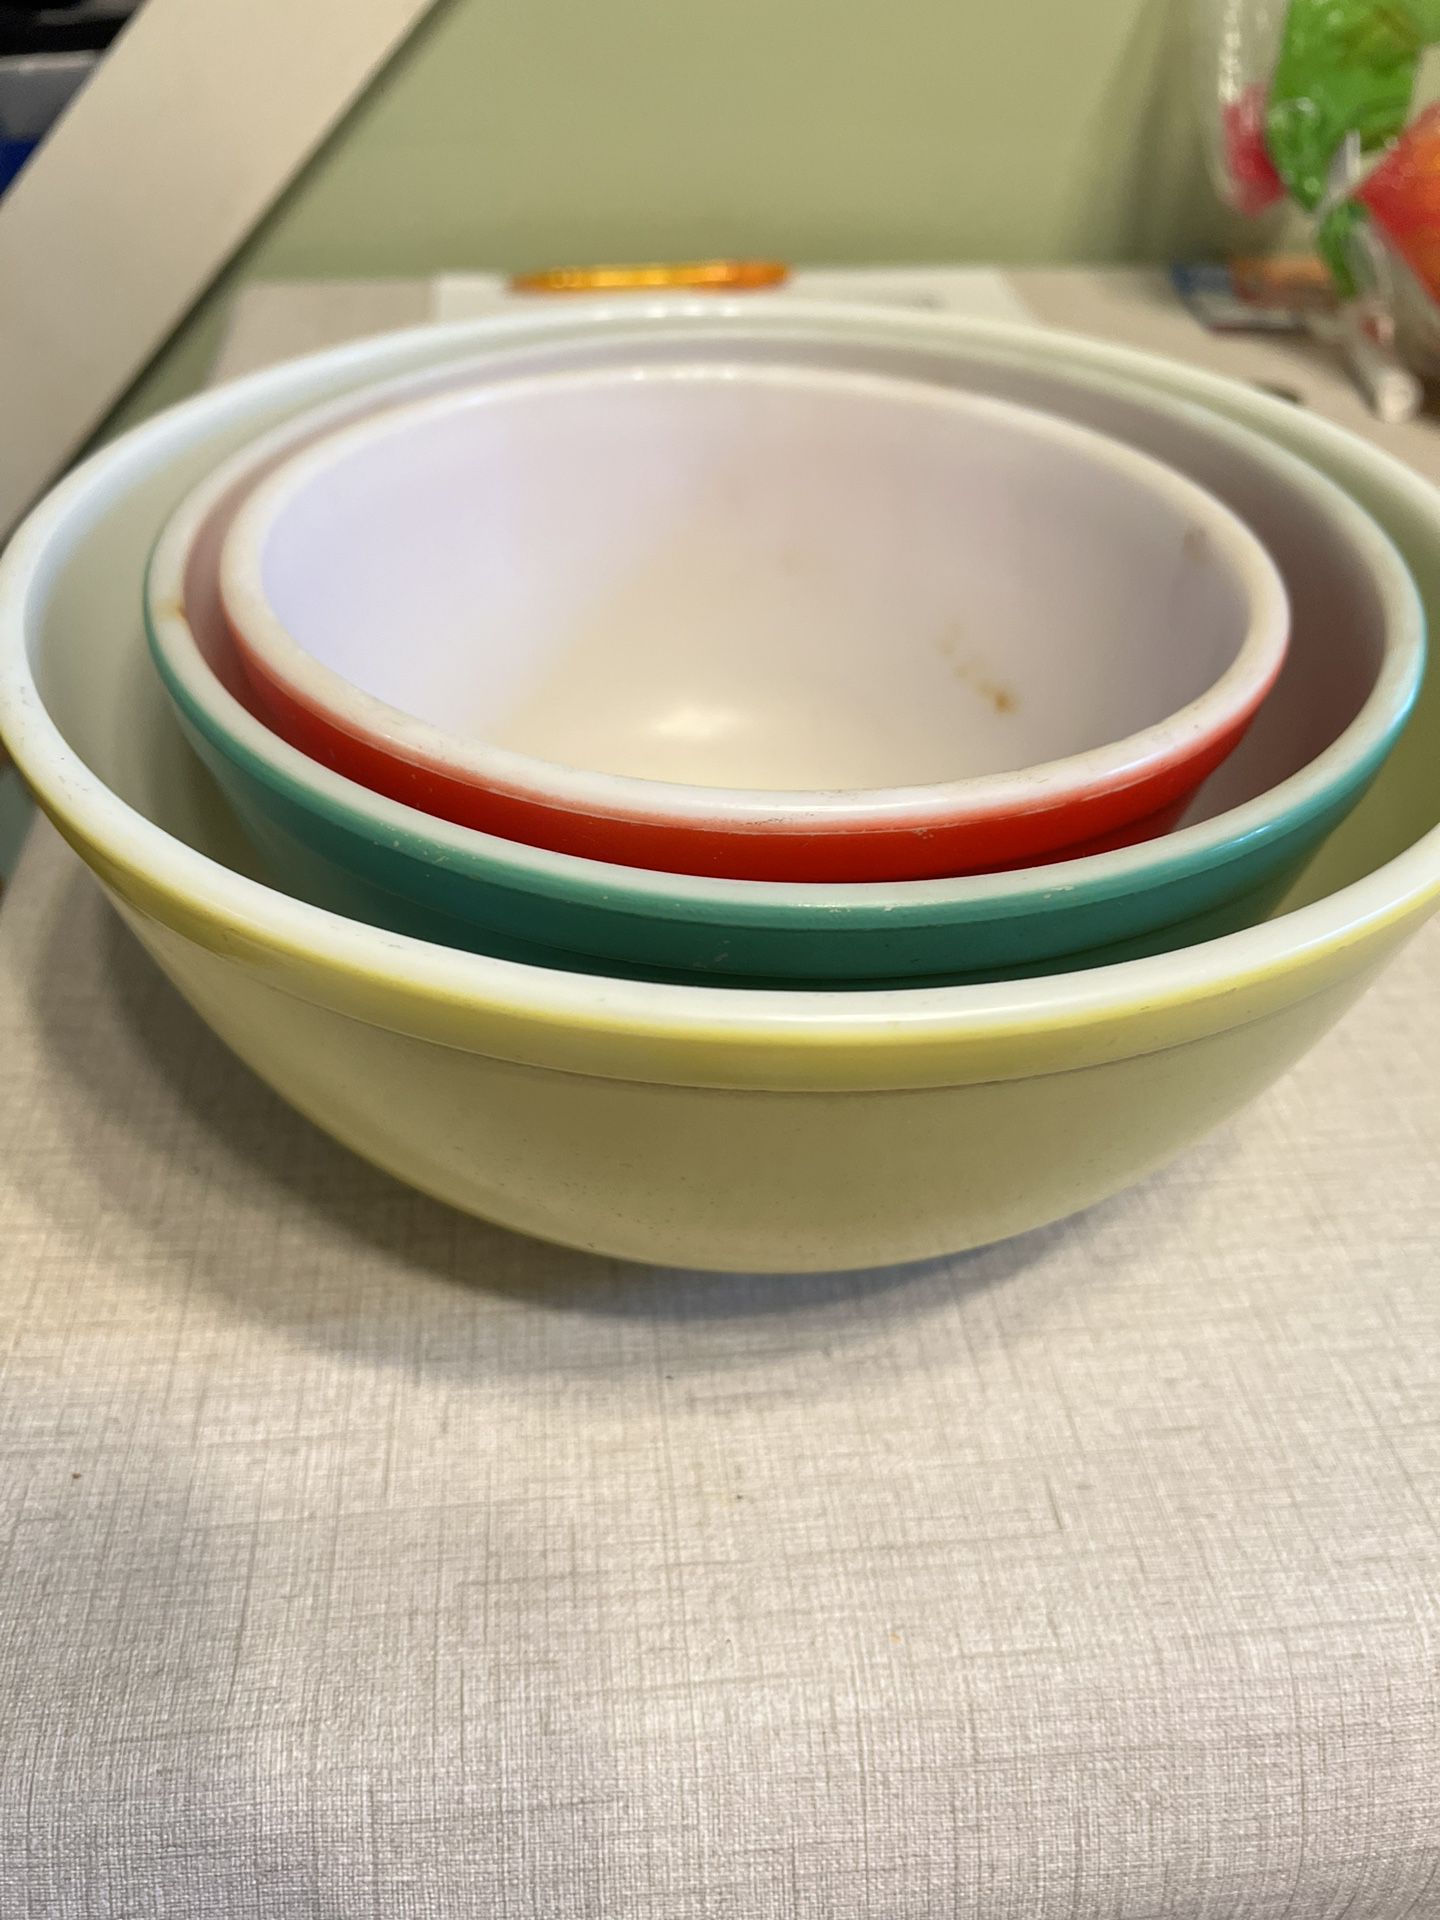 Set of 3 Vintage Pyrex Primary Color Nesting Glass Mixing Bowls 402 403 404